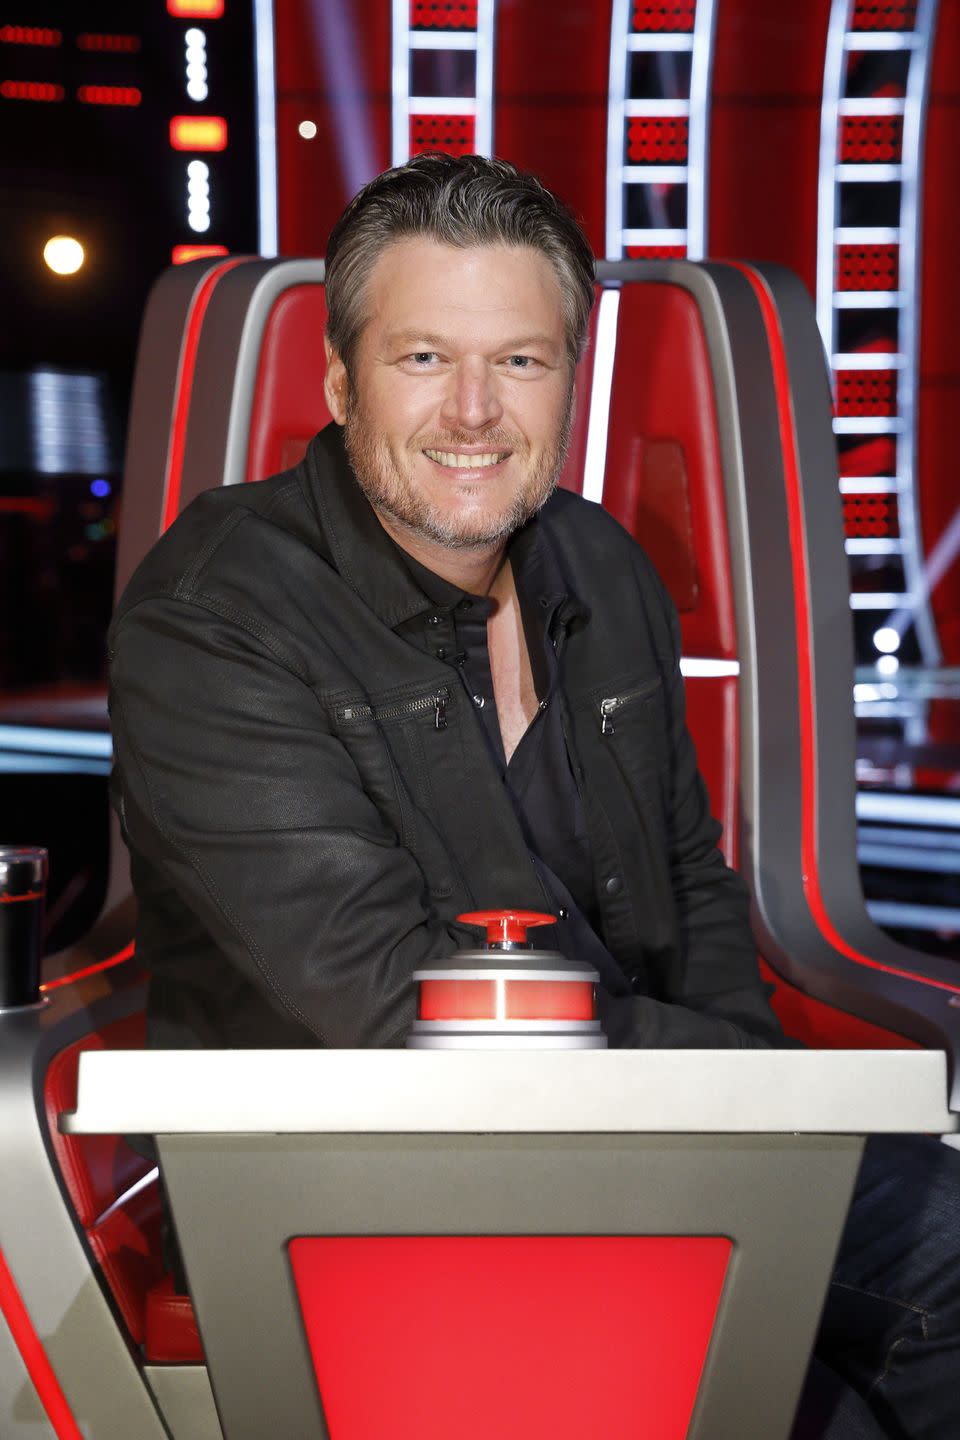 <p>For nearly ten years, Shelton has held a coaches chair in the hit singing competition series, <em>The Voice</em>. However, his television tenure hasn't hurt his musical ambitions. 2019 saw the release of his compilation album, <em>Fully Loaded: God's Country</em>, led by the single "God's Country," which earned the star a Grammy nomination for Best Country Solo Performance.</p>